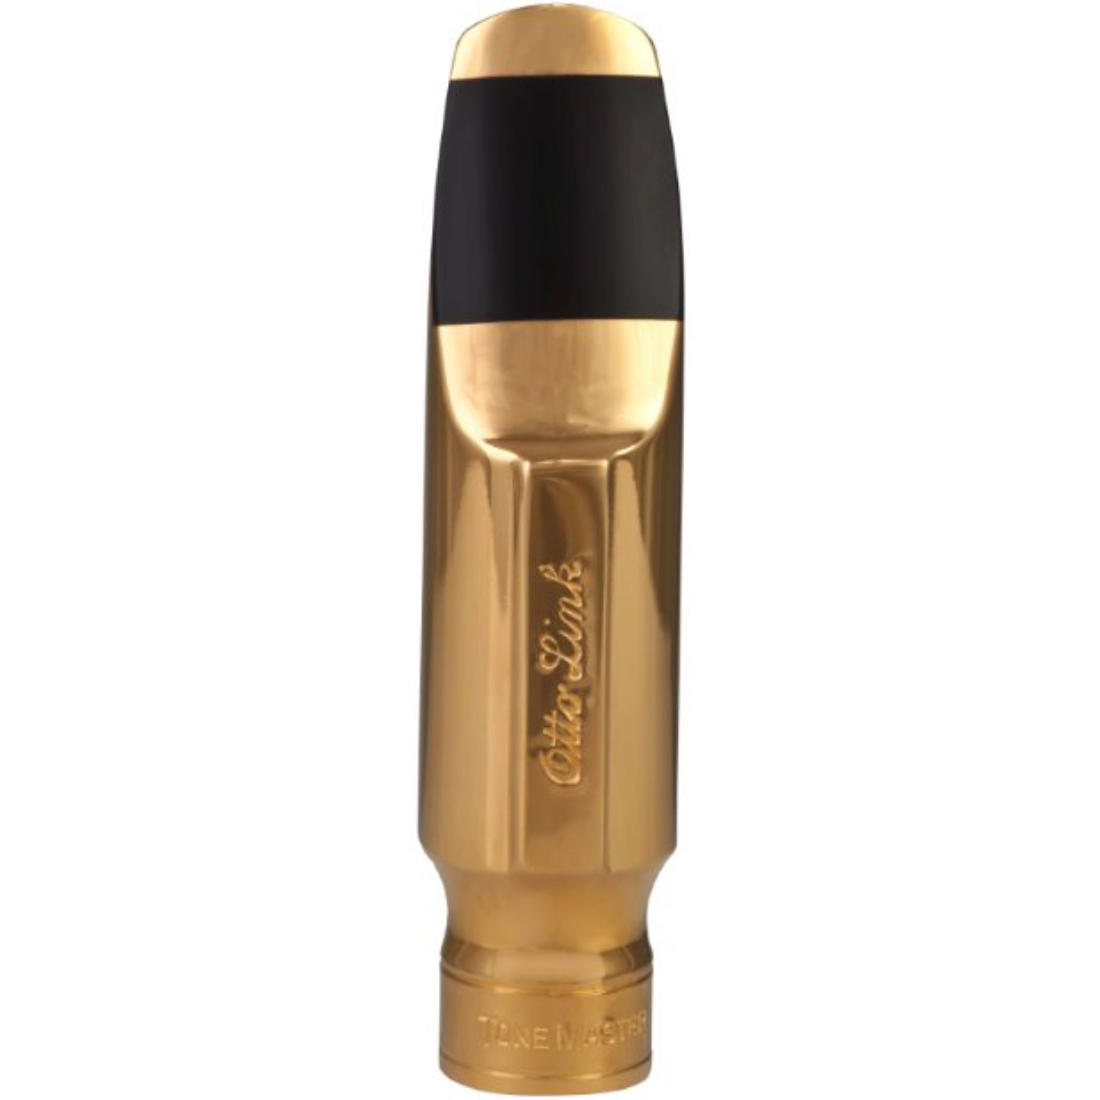 Gold plated Otto Link tenor saxophone mouthpiece